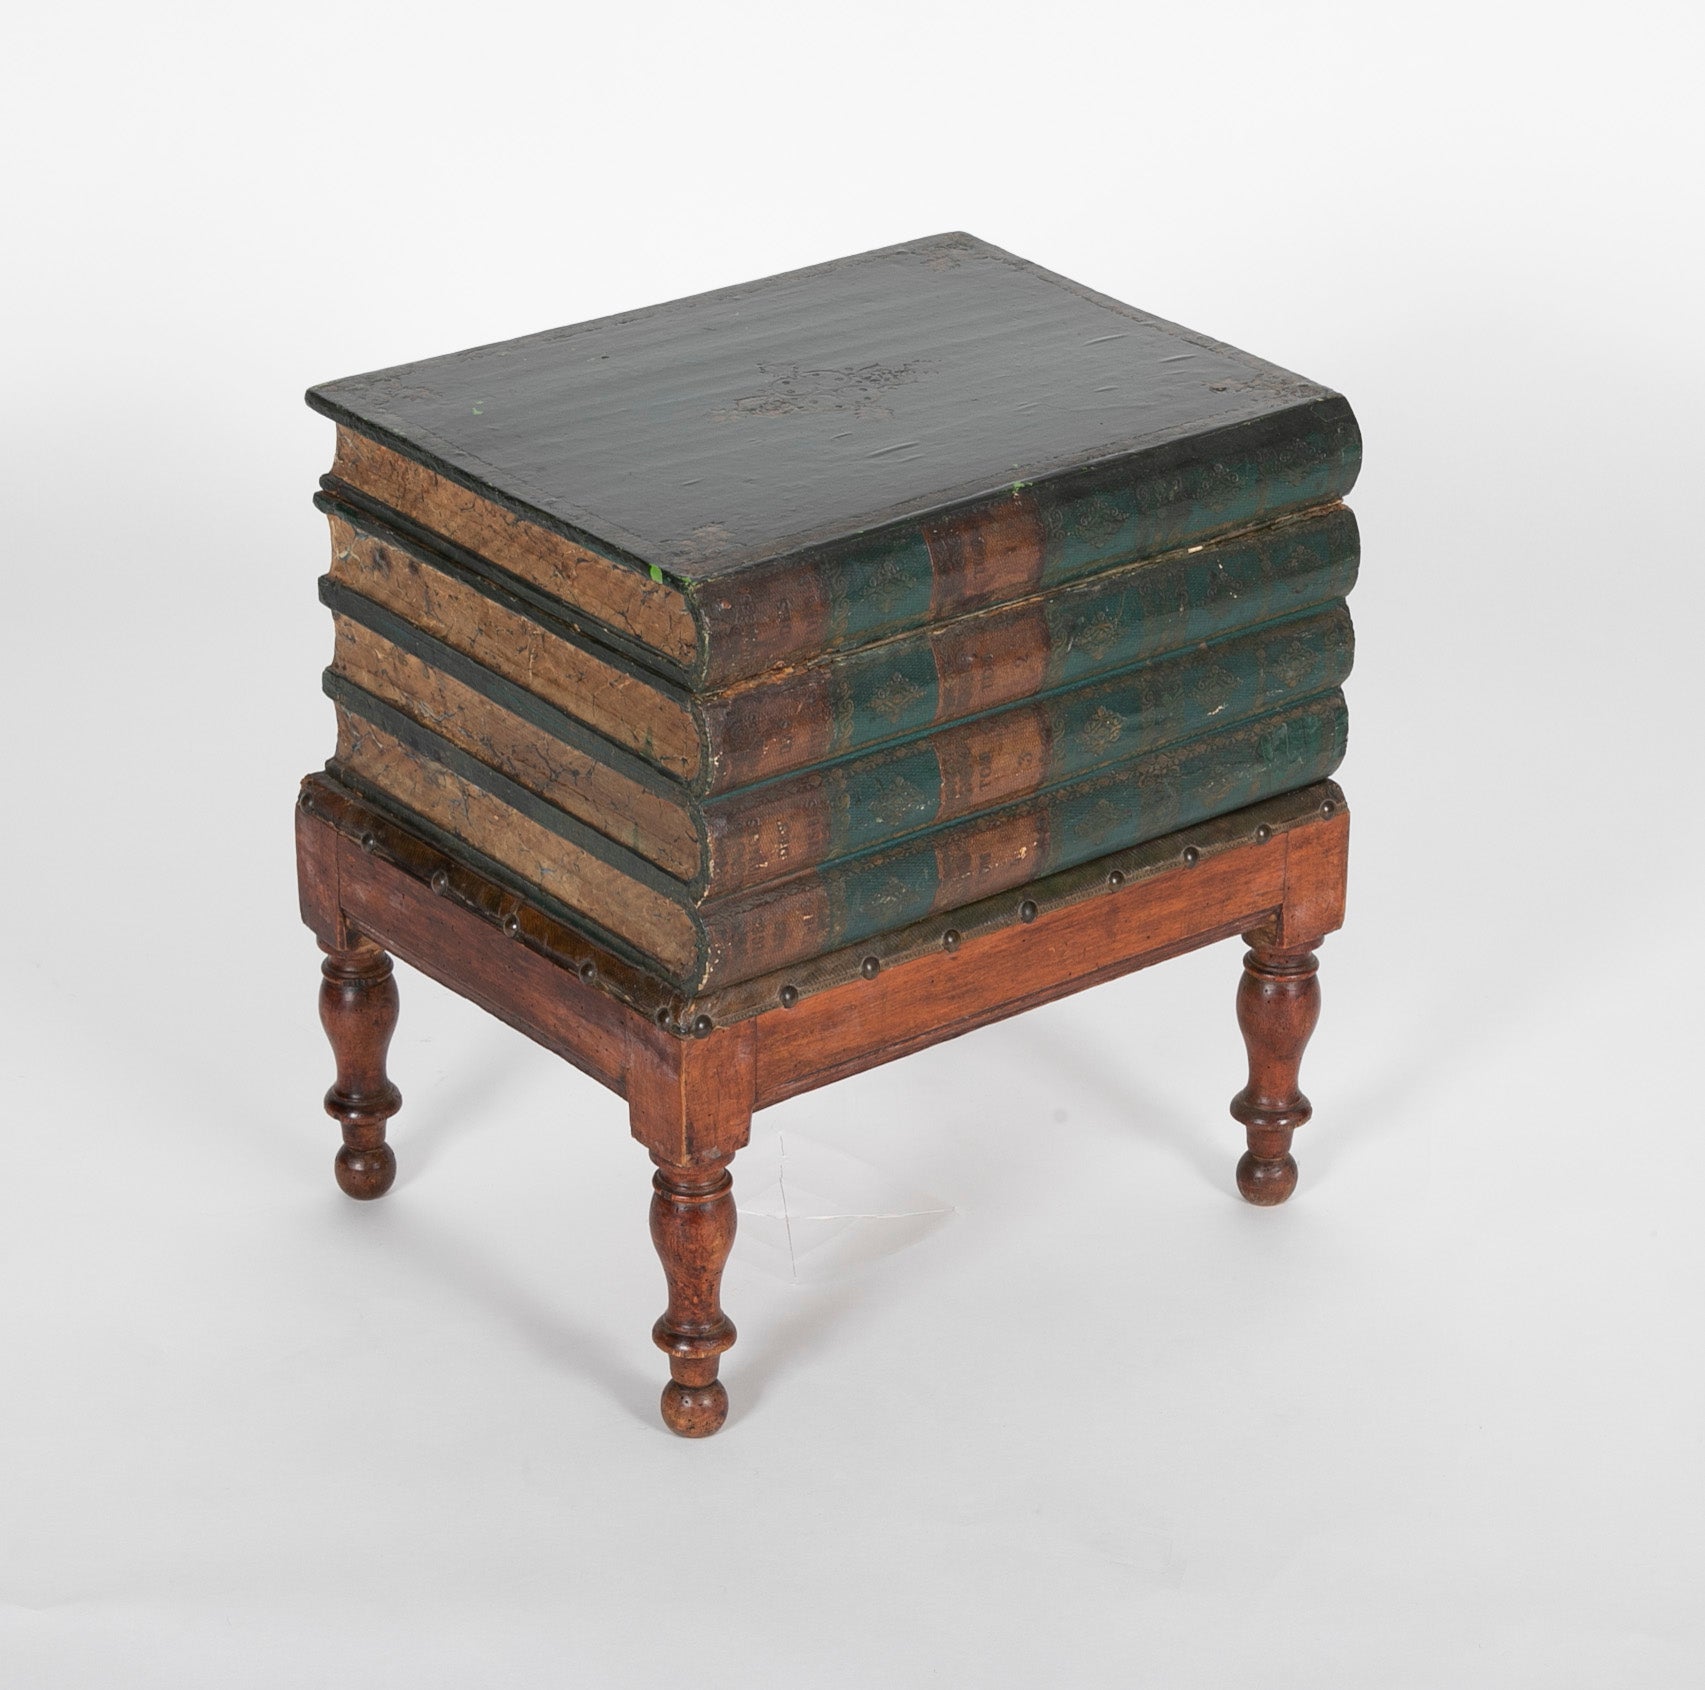 Stacked Book Form English Low Table